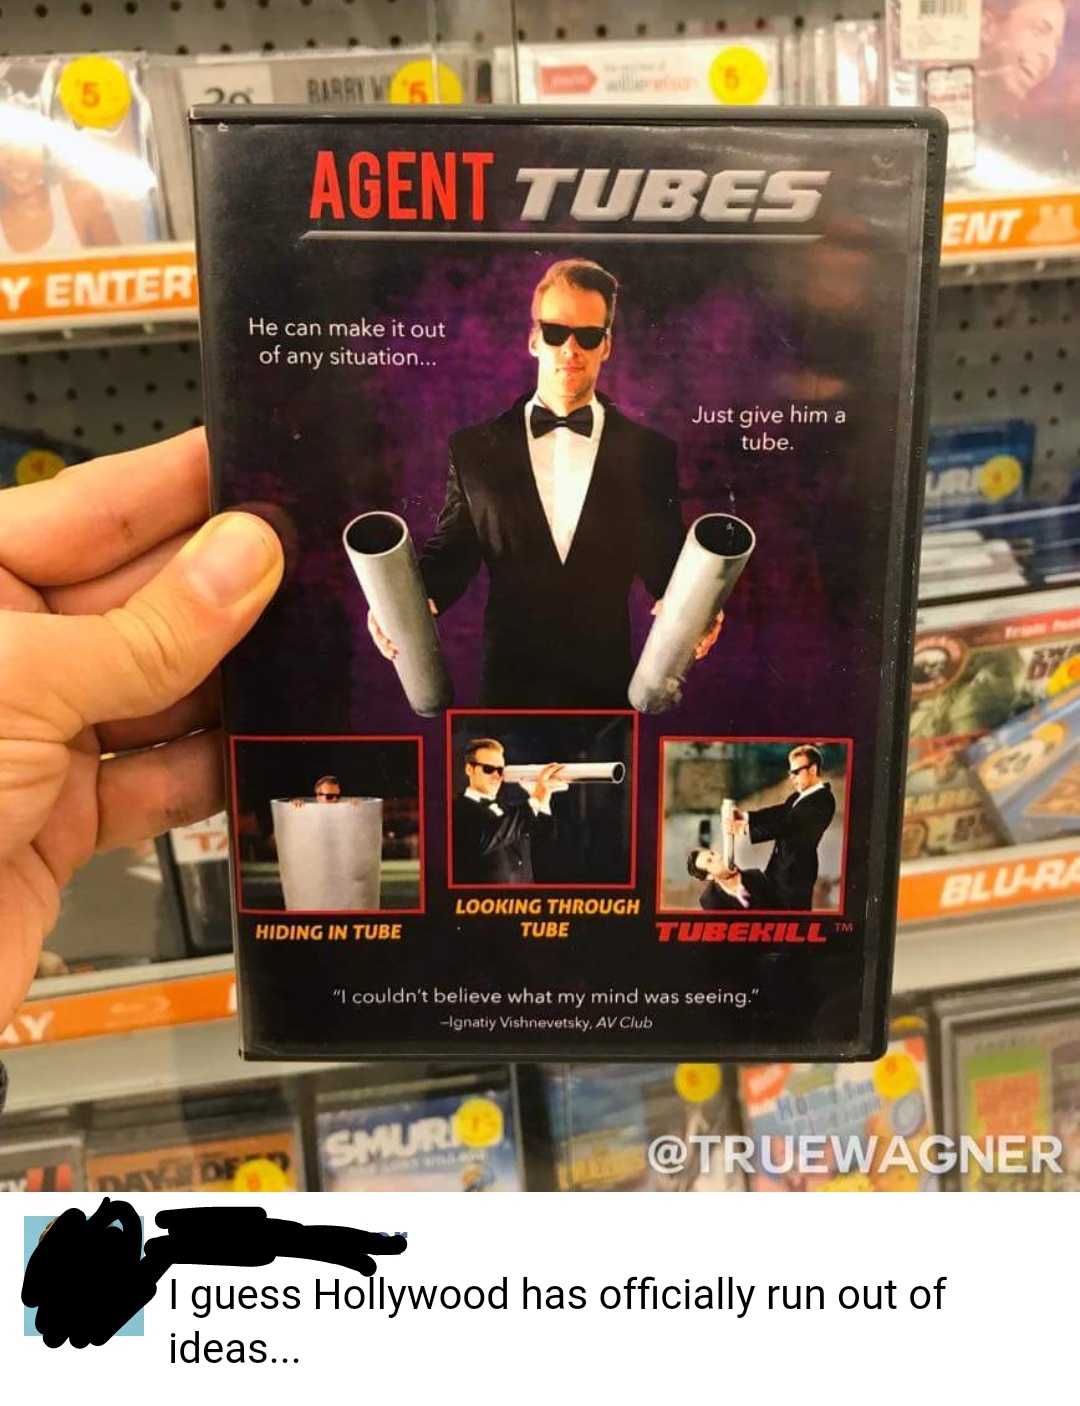 poster - Agent Tubes Ent Y Enter He can make it out of any situation... Just give him a tube. BluRa Looking Through Tube Hiding In Tube Tubekill "I couldn't believe what my mind was seeing." Ignatiy Vishnevetsky, Av Club I guess Hollywood has officially r